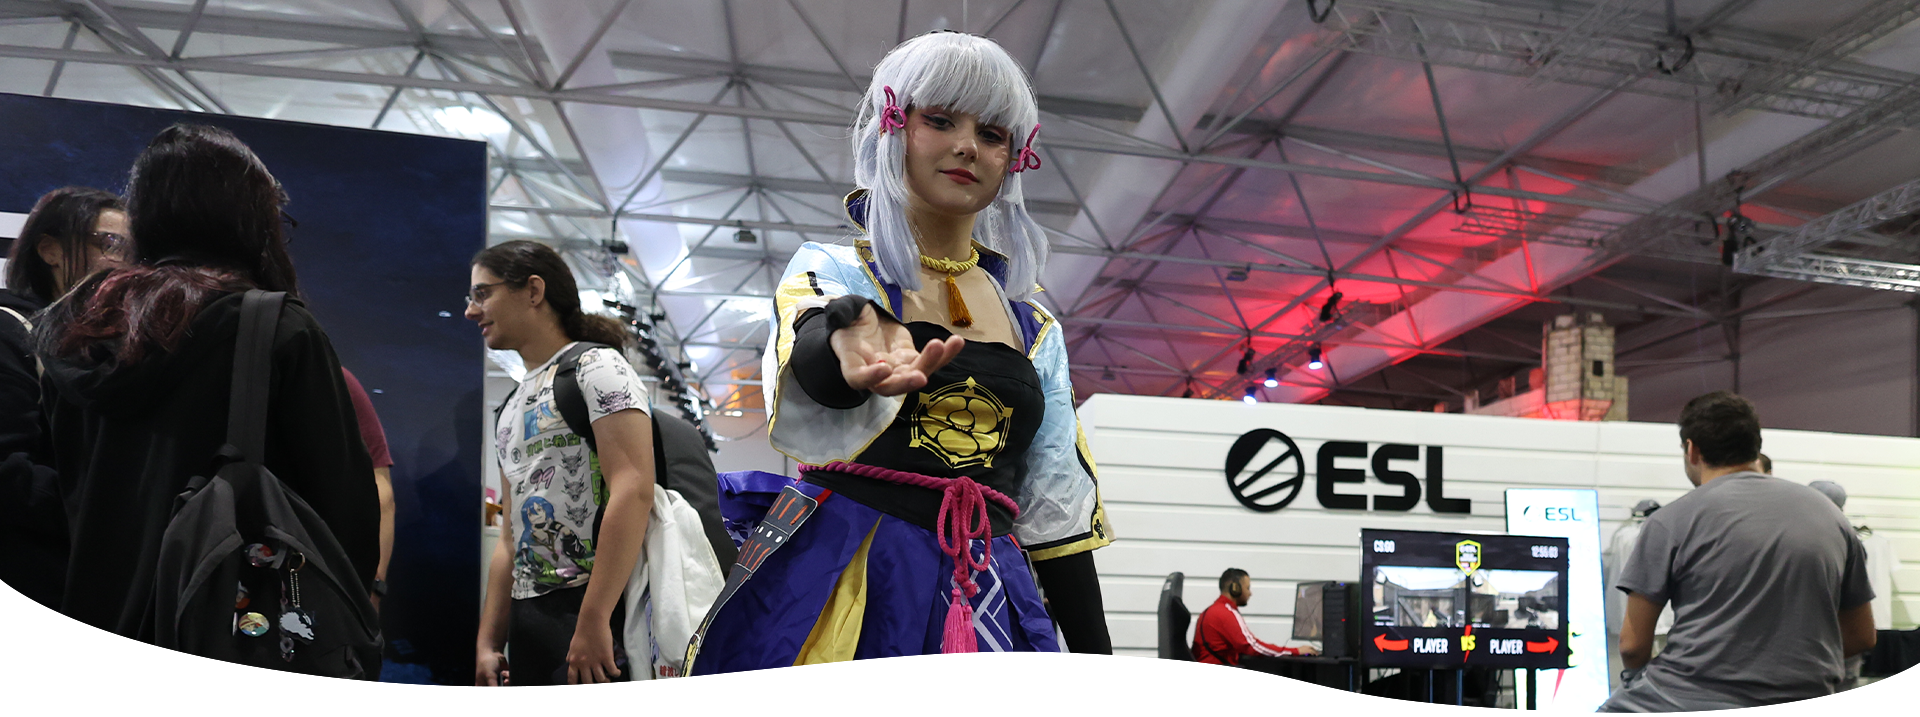 cosplay-banner-4